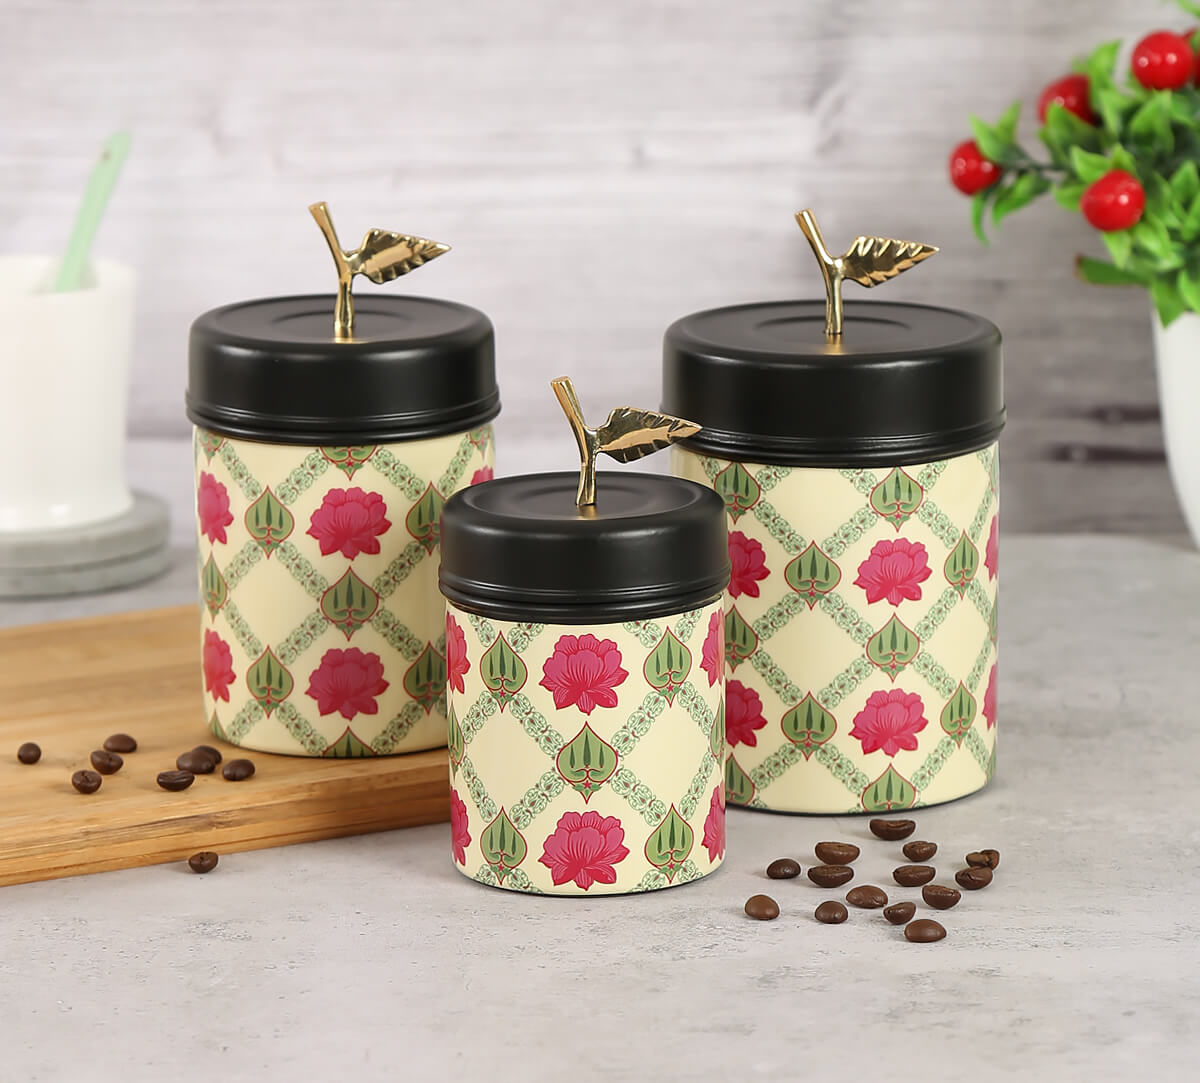 Conifered Lotus Symmetry Steel Container Set of 3